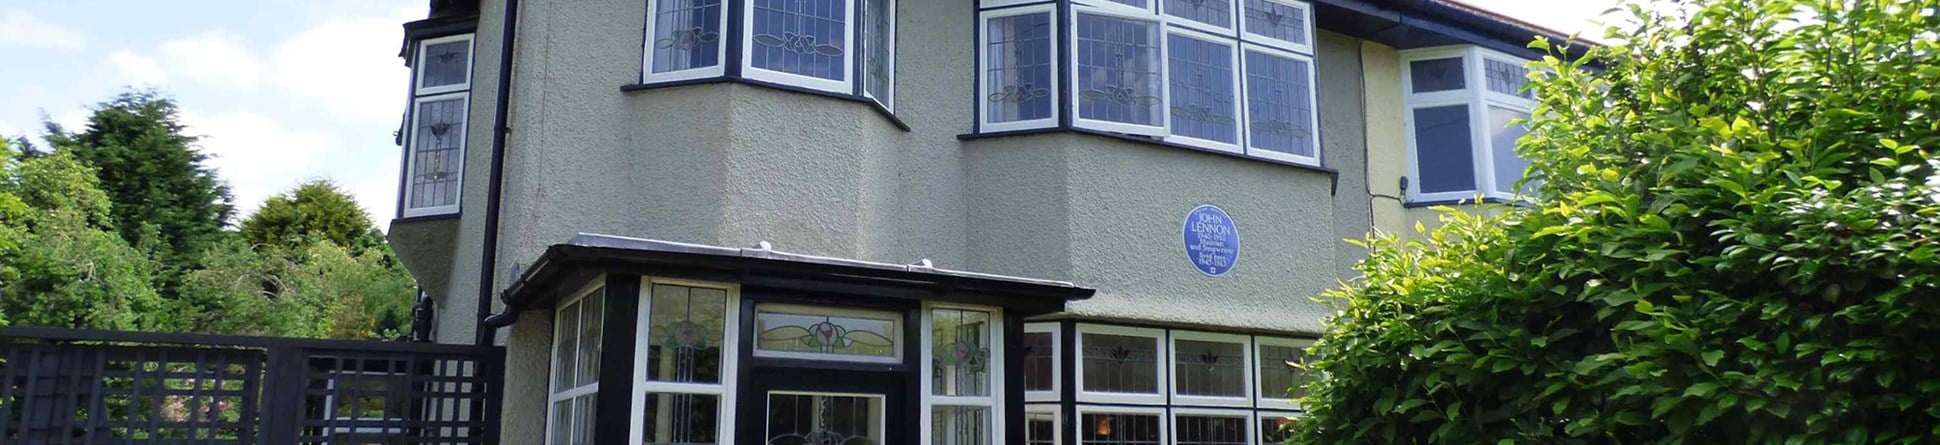 The front exterior of a semi-detached house in Liverpool with a Blue Plaque celebrating the singer, songwriter, musician and peace activist John Lennon